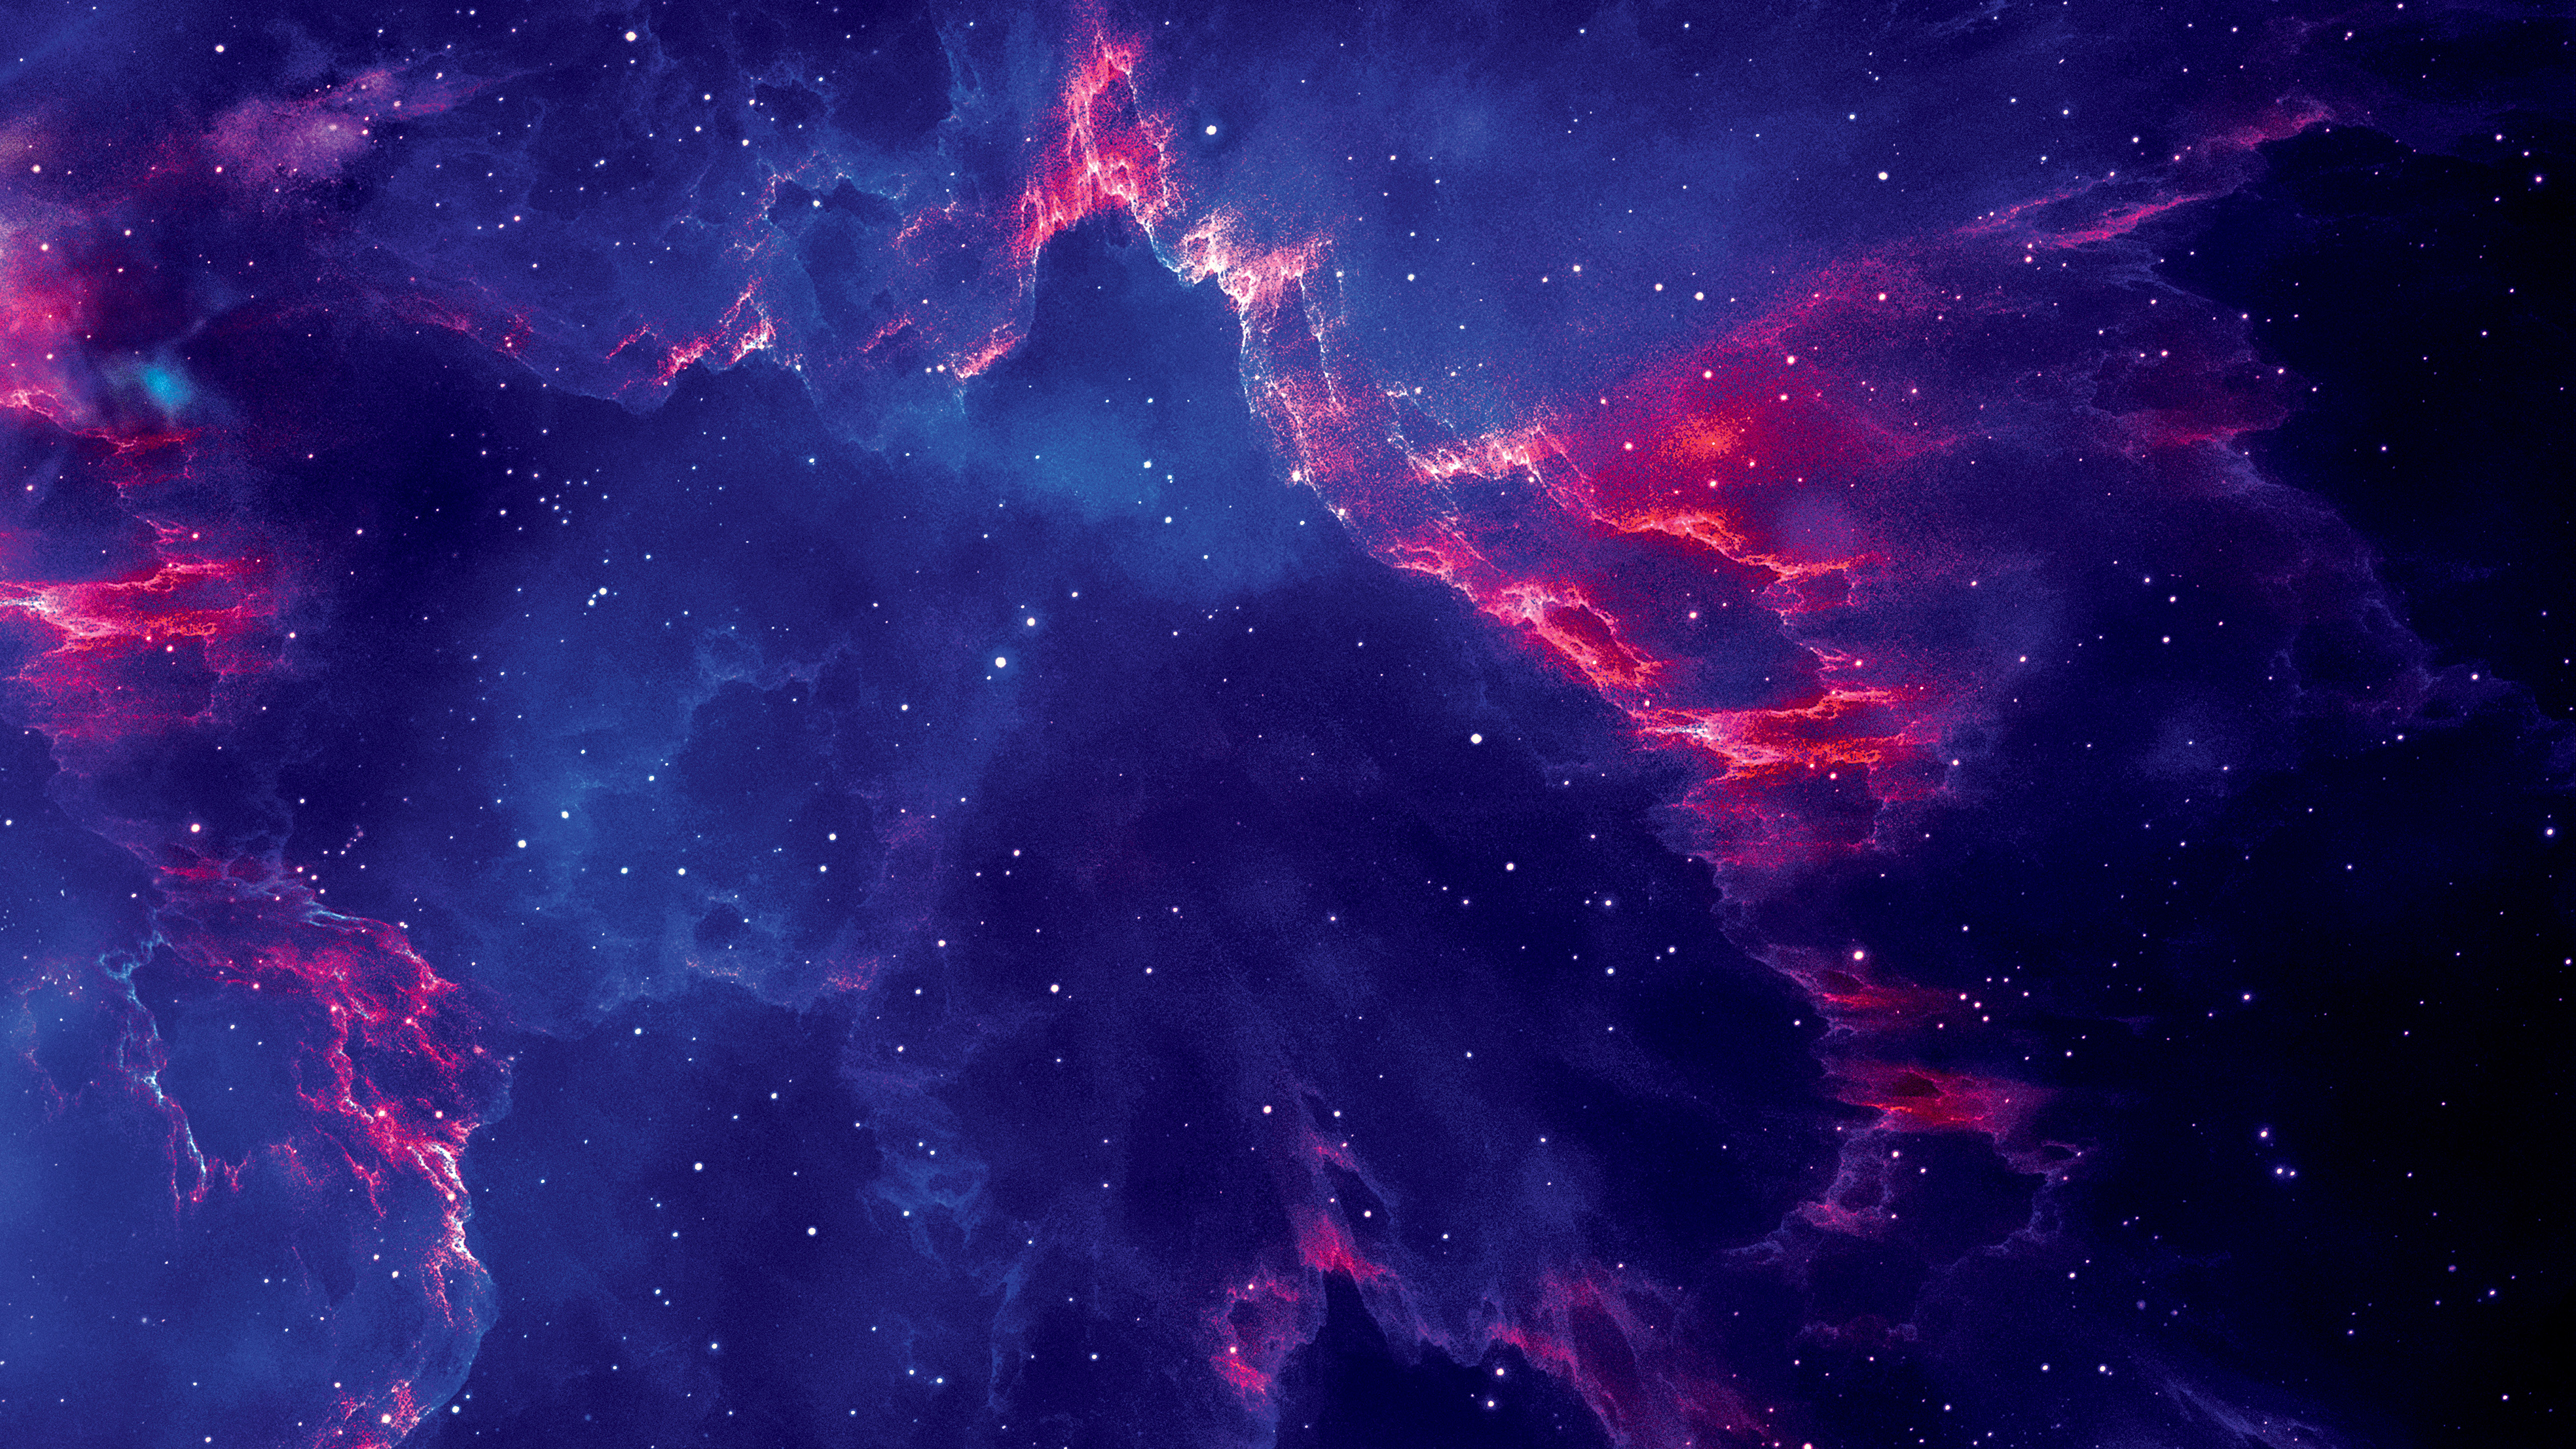 Starry Galaxy Background Hd Artist 4k Wallpapers Images Photos